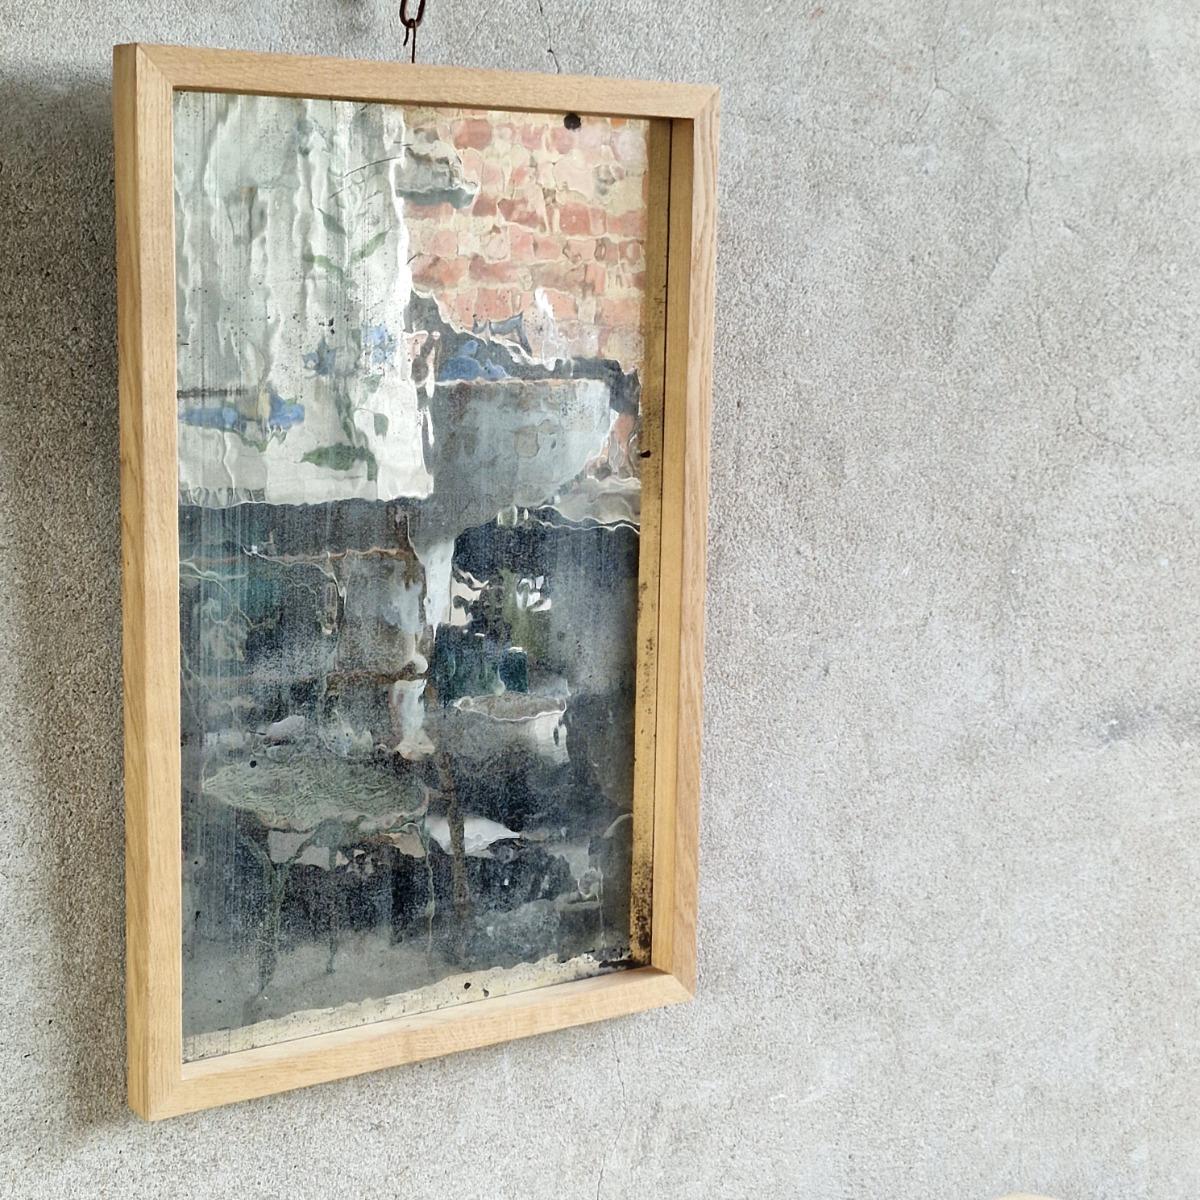 Arty old blurred mirror with modern look